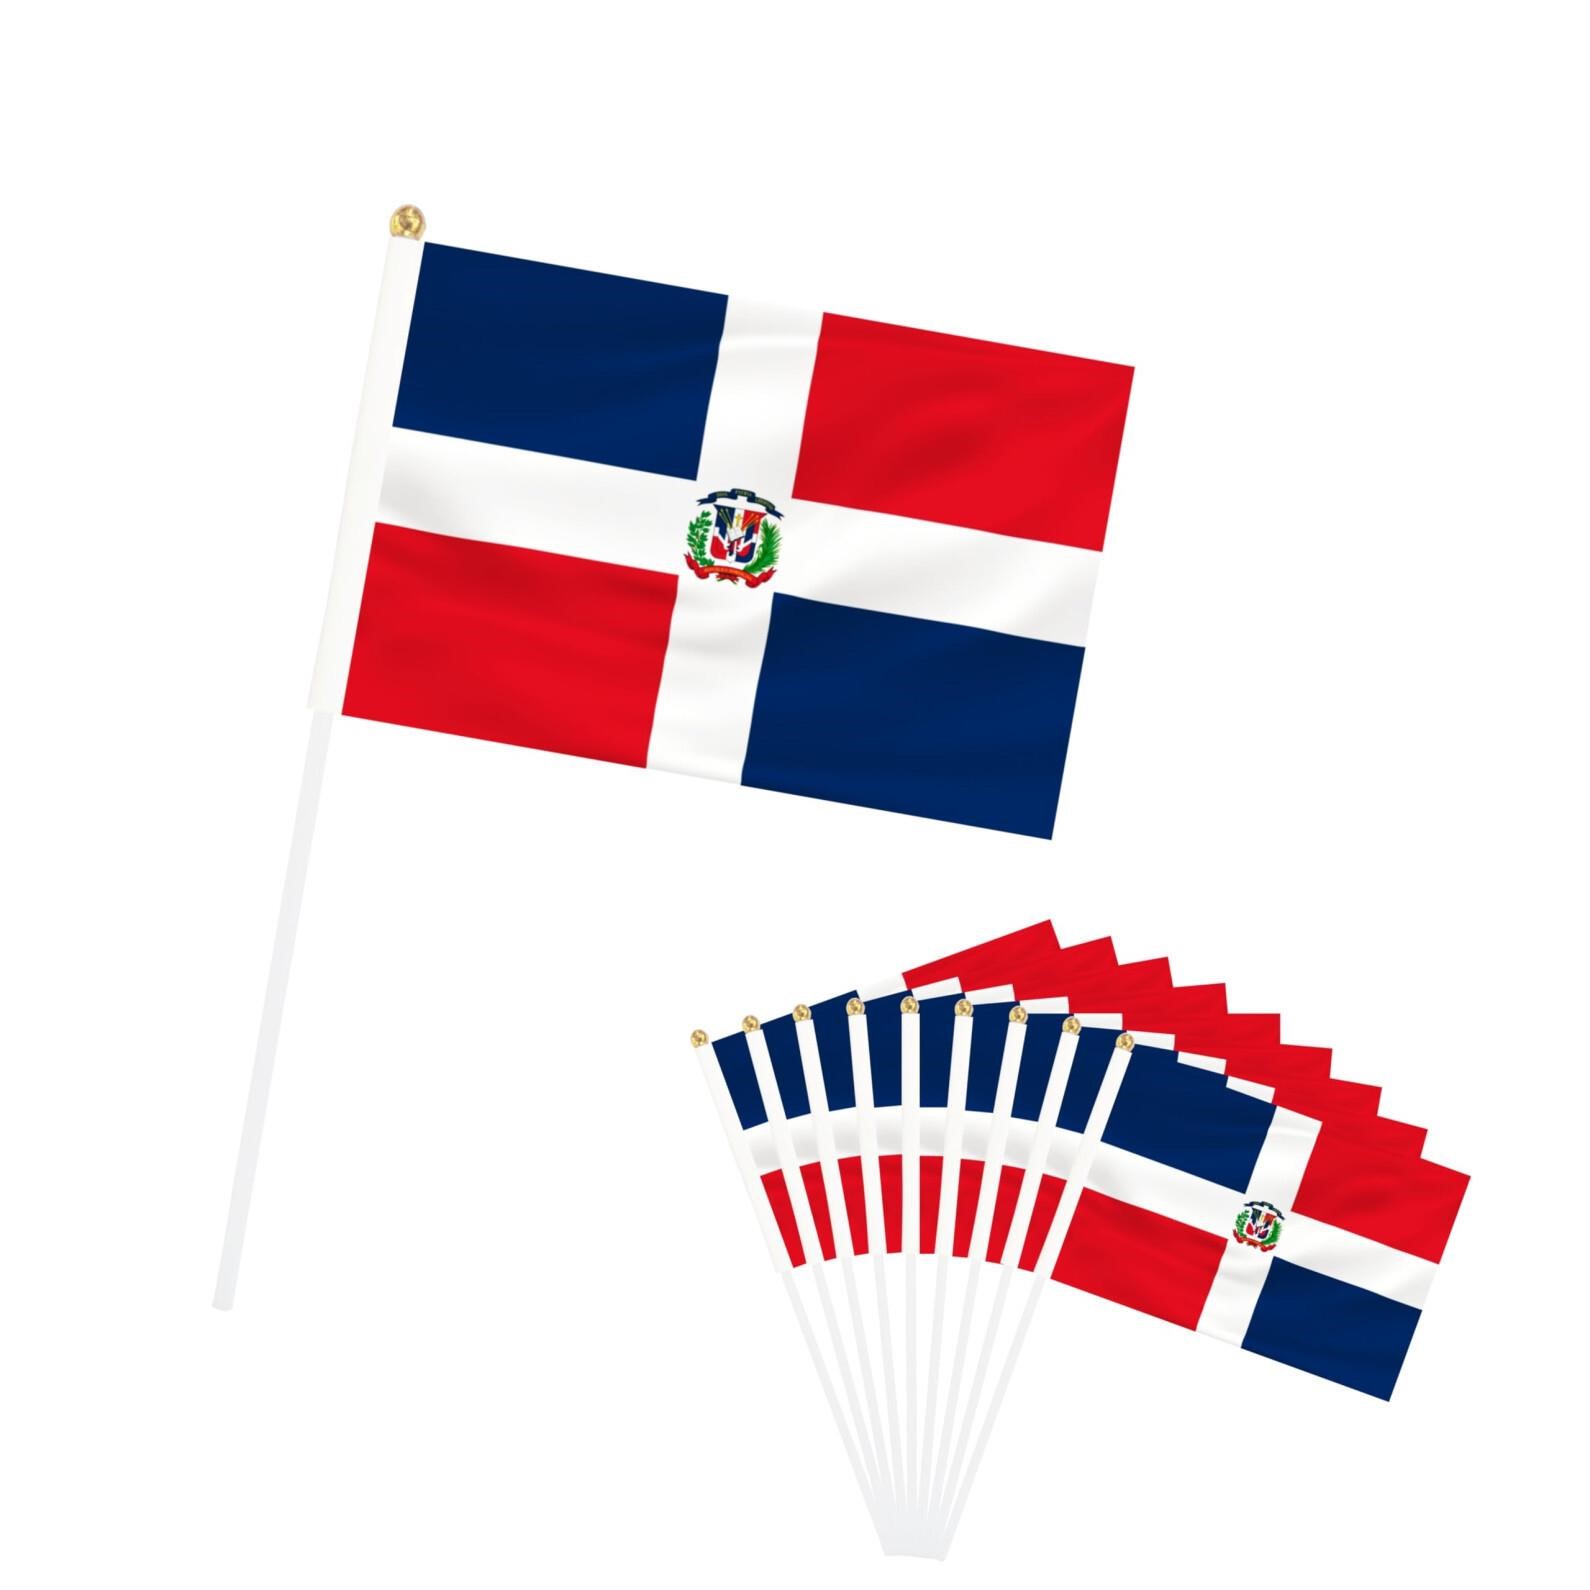 Rotenl Dominica Small Mini Flags, 20 Pack Hand Hel